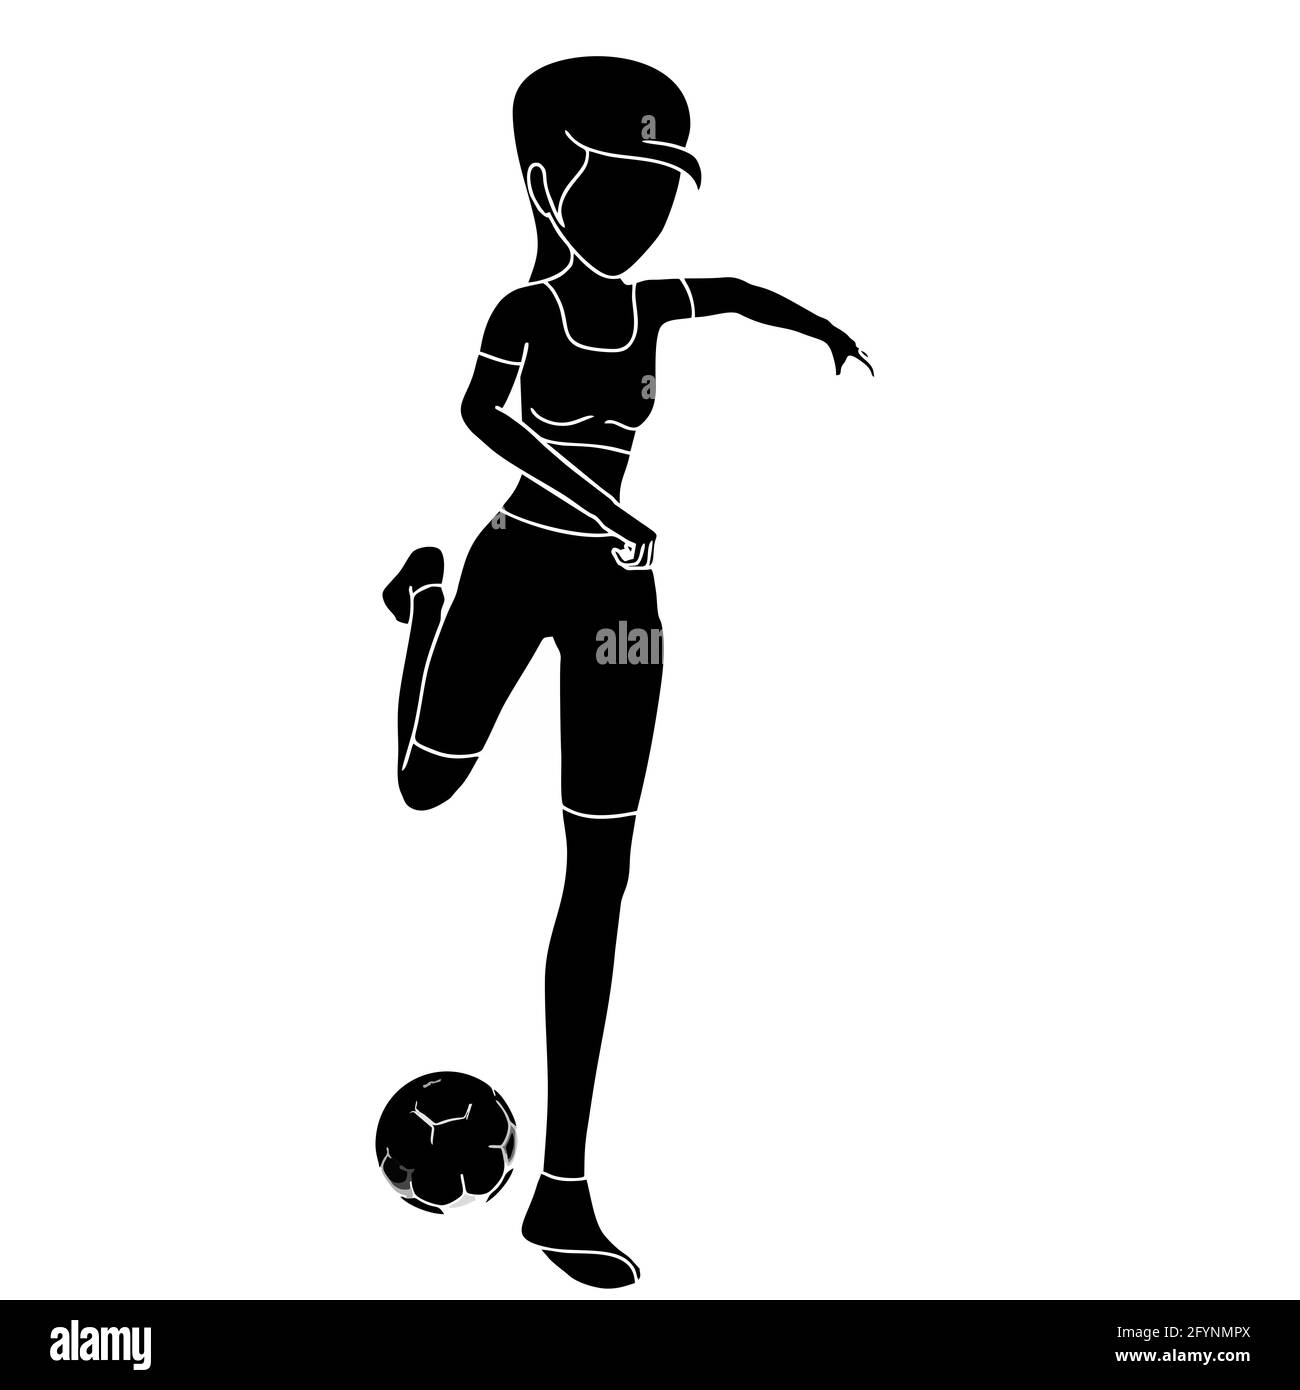 Silhouette of a cartoon woman kicking a ball while playing soccer illustrated on white background Stock Photo